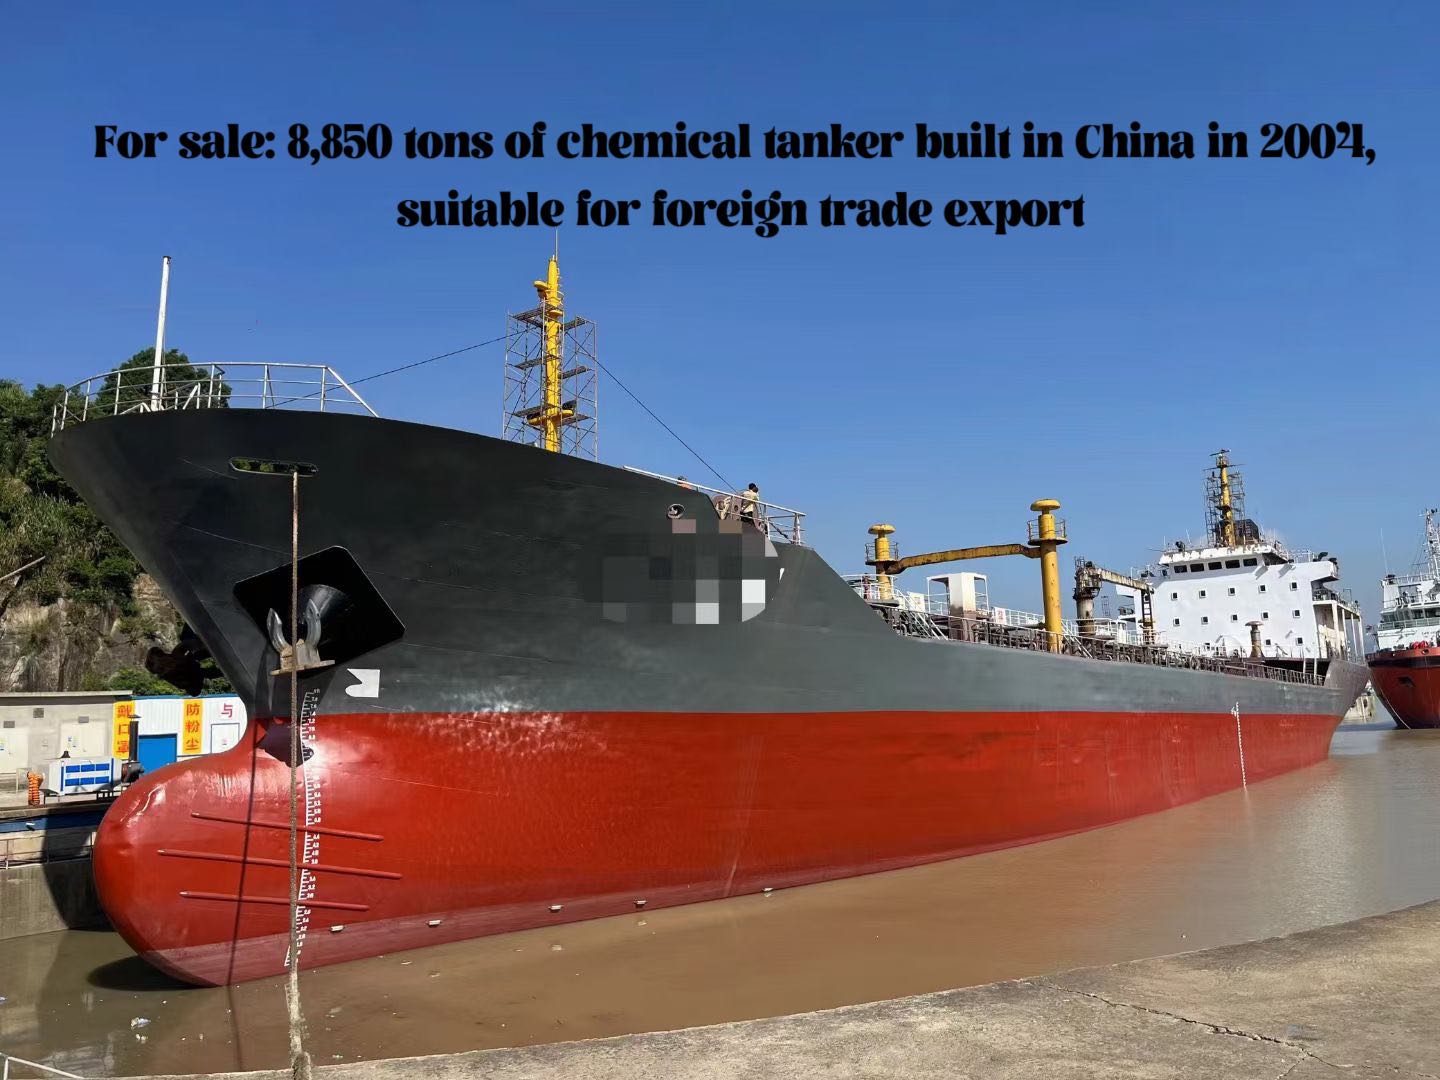 For sale: 8,850 tons of chemical tanker built in China in 2004, suitable for foreign trade export